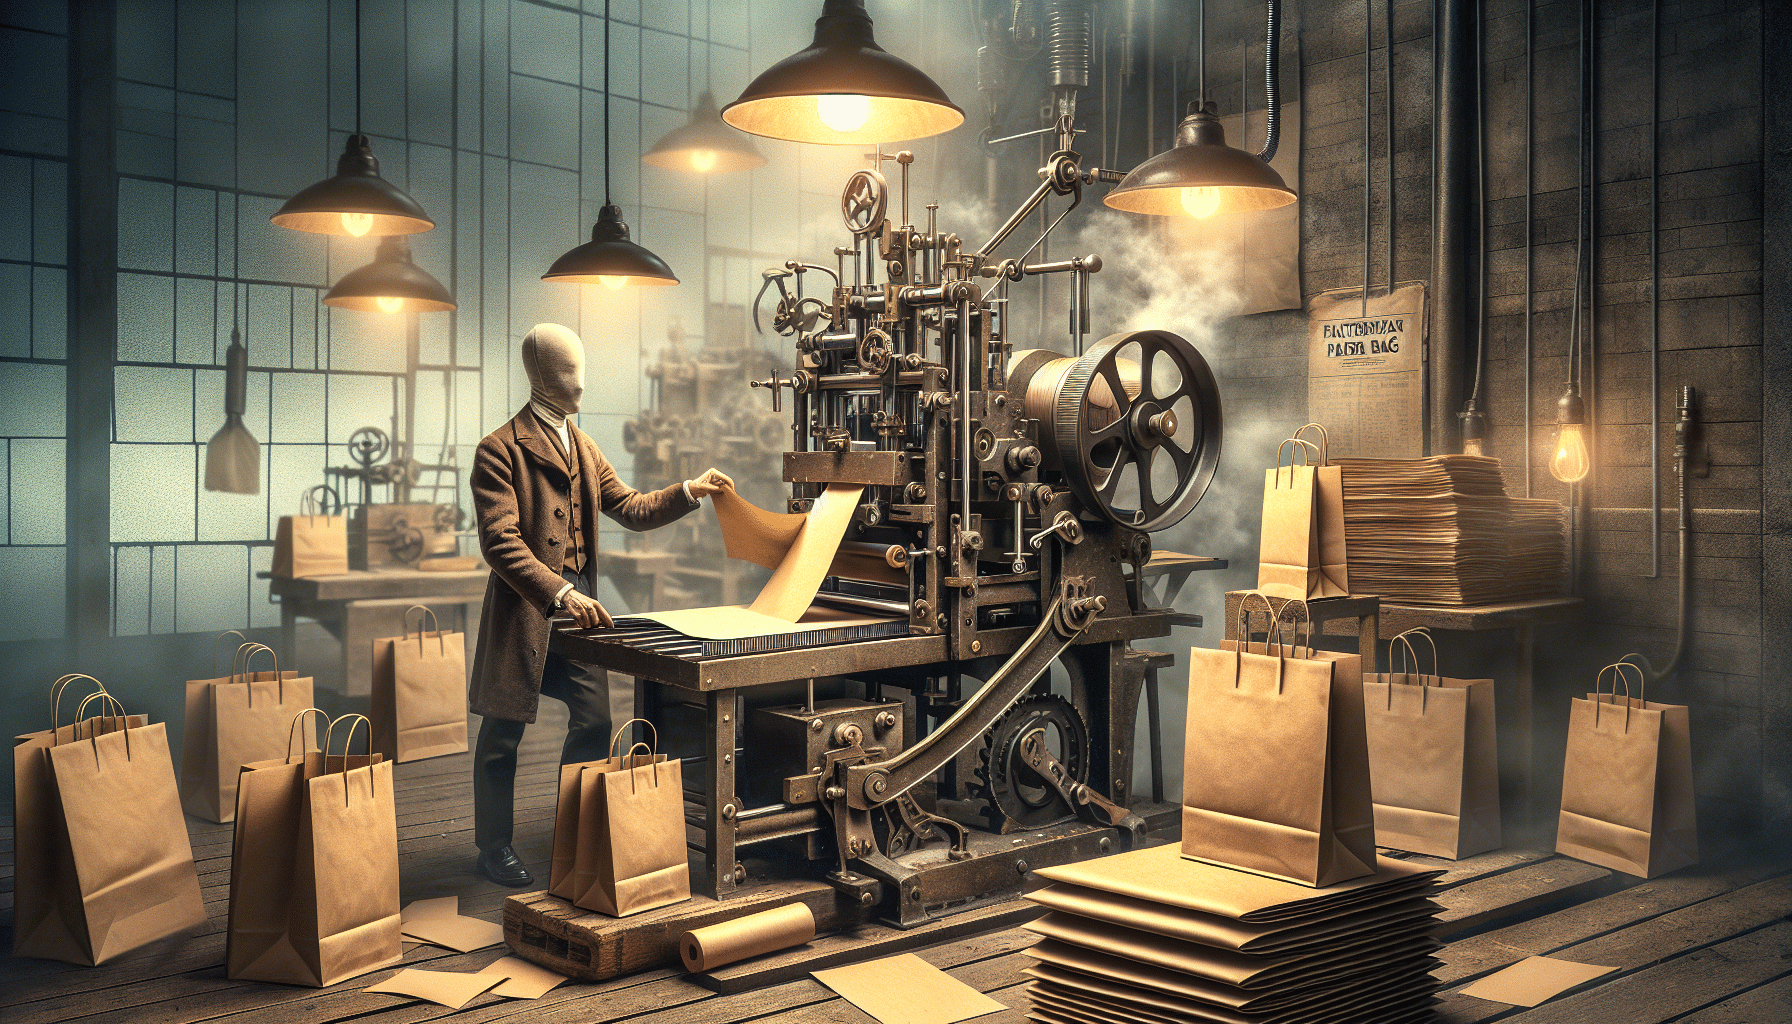 Francis wolle operating early paper bag manufacturing machine.